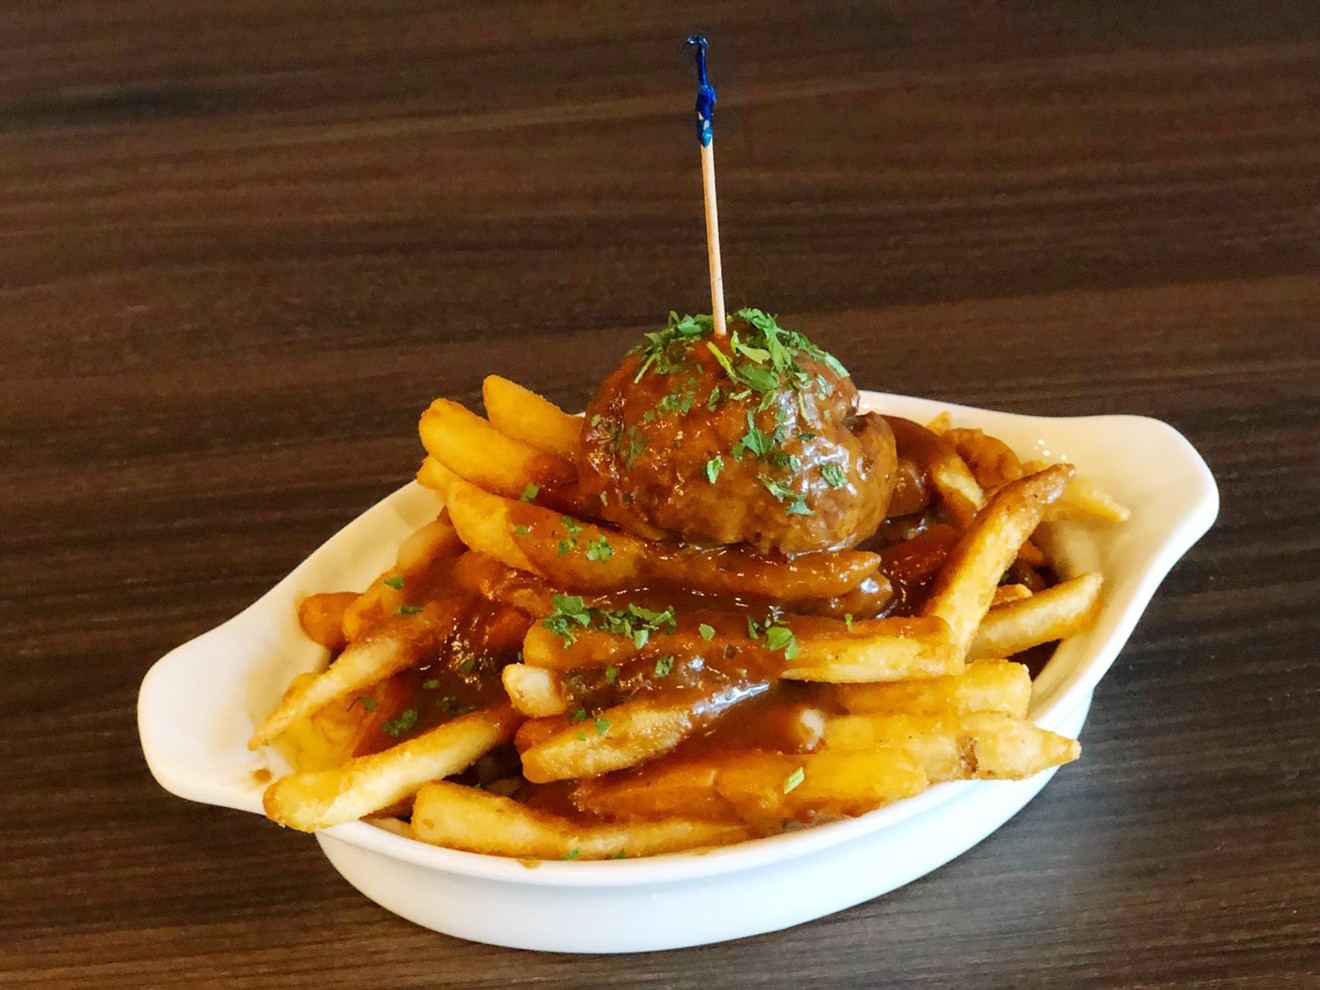 The poutine at Meatballz Inc. comes with a meatball of choice on top of sturdy fries covered in rich mushroom gravy and cheese curds.